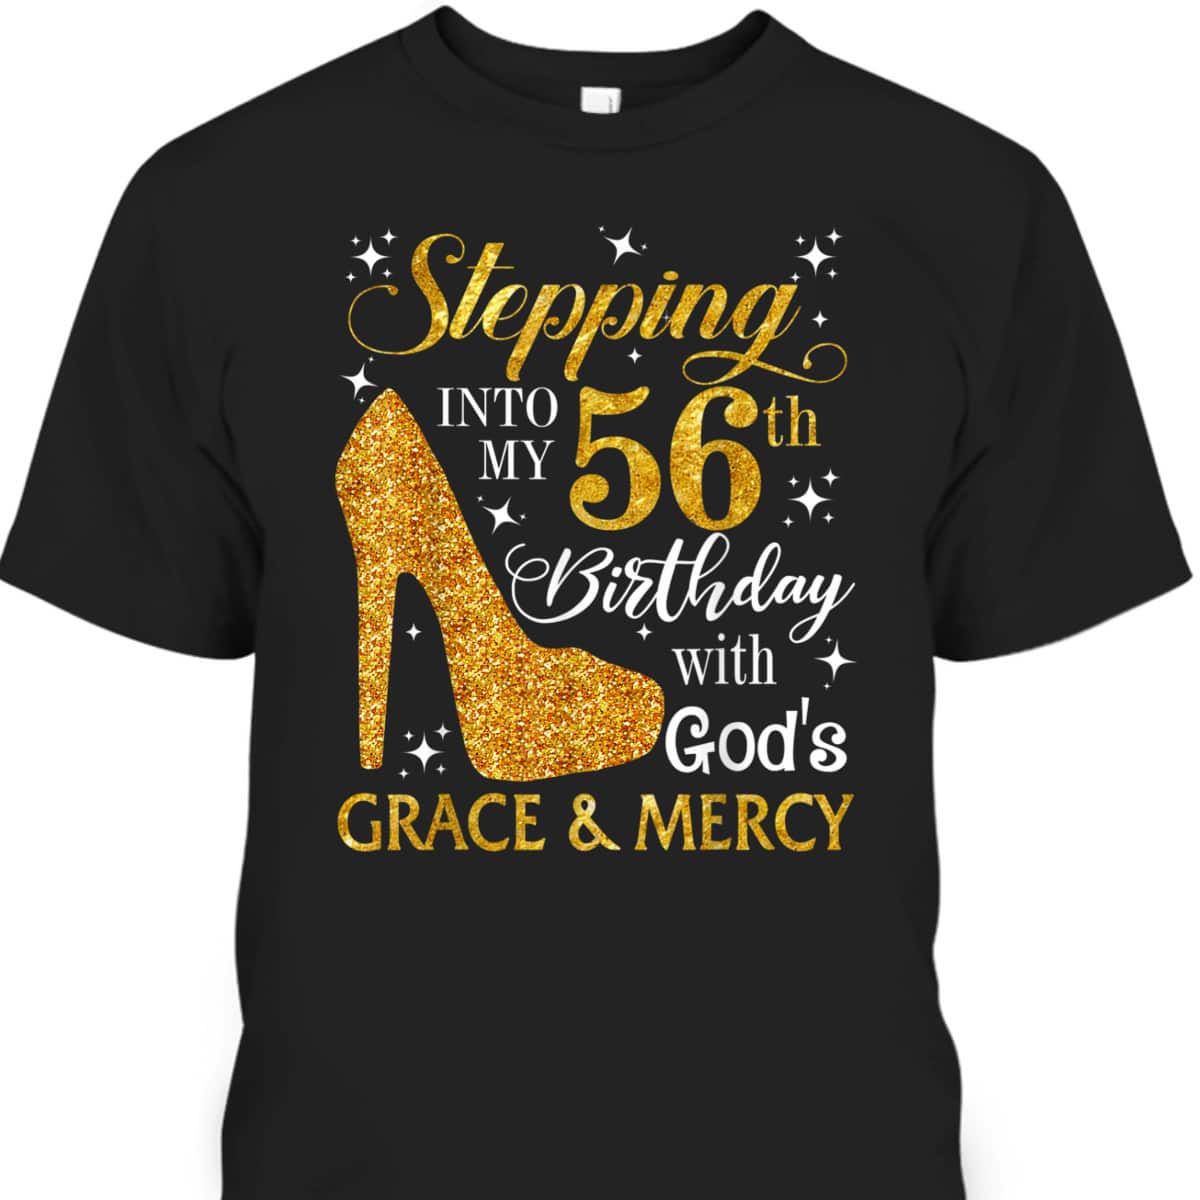 Christian Birthday T-Shirt Stepping Into My 56th Birthday With God's Grace And Mercy